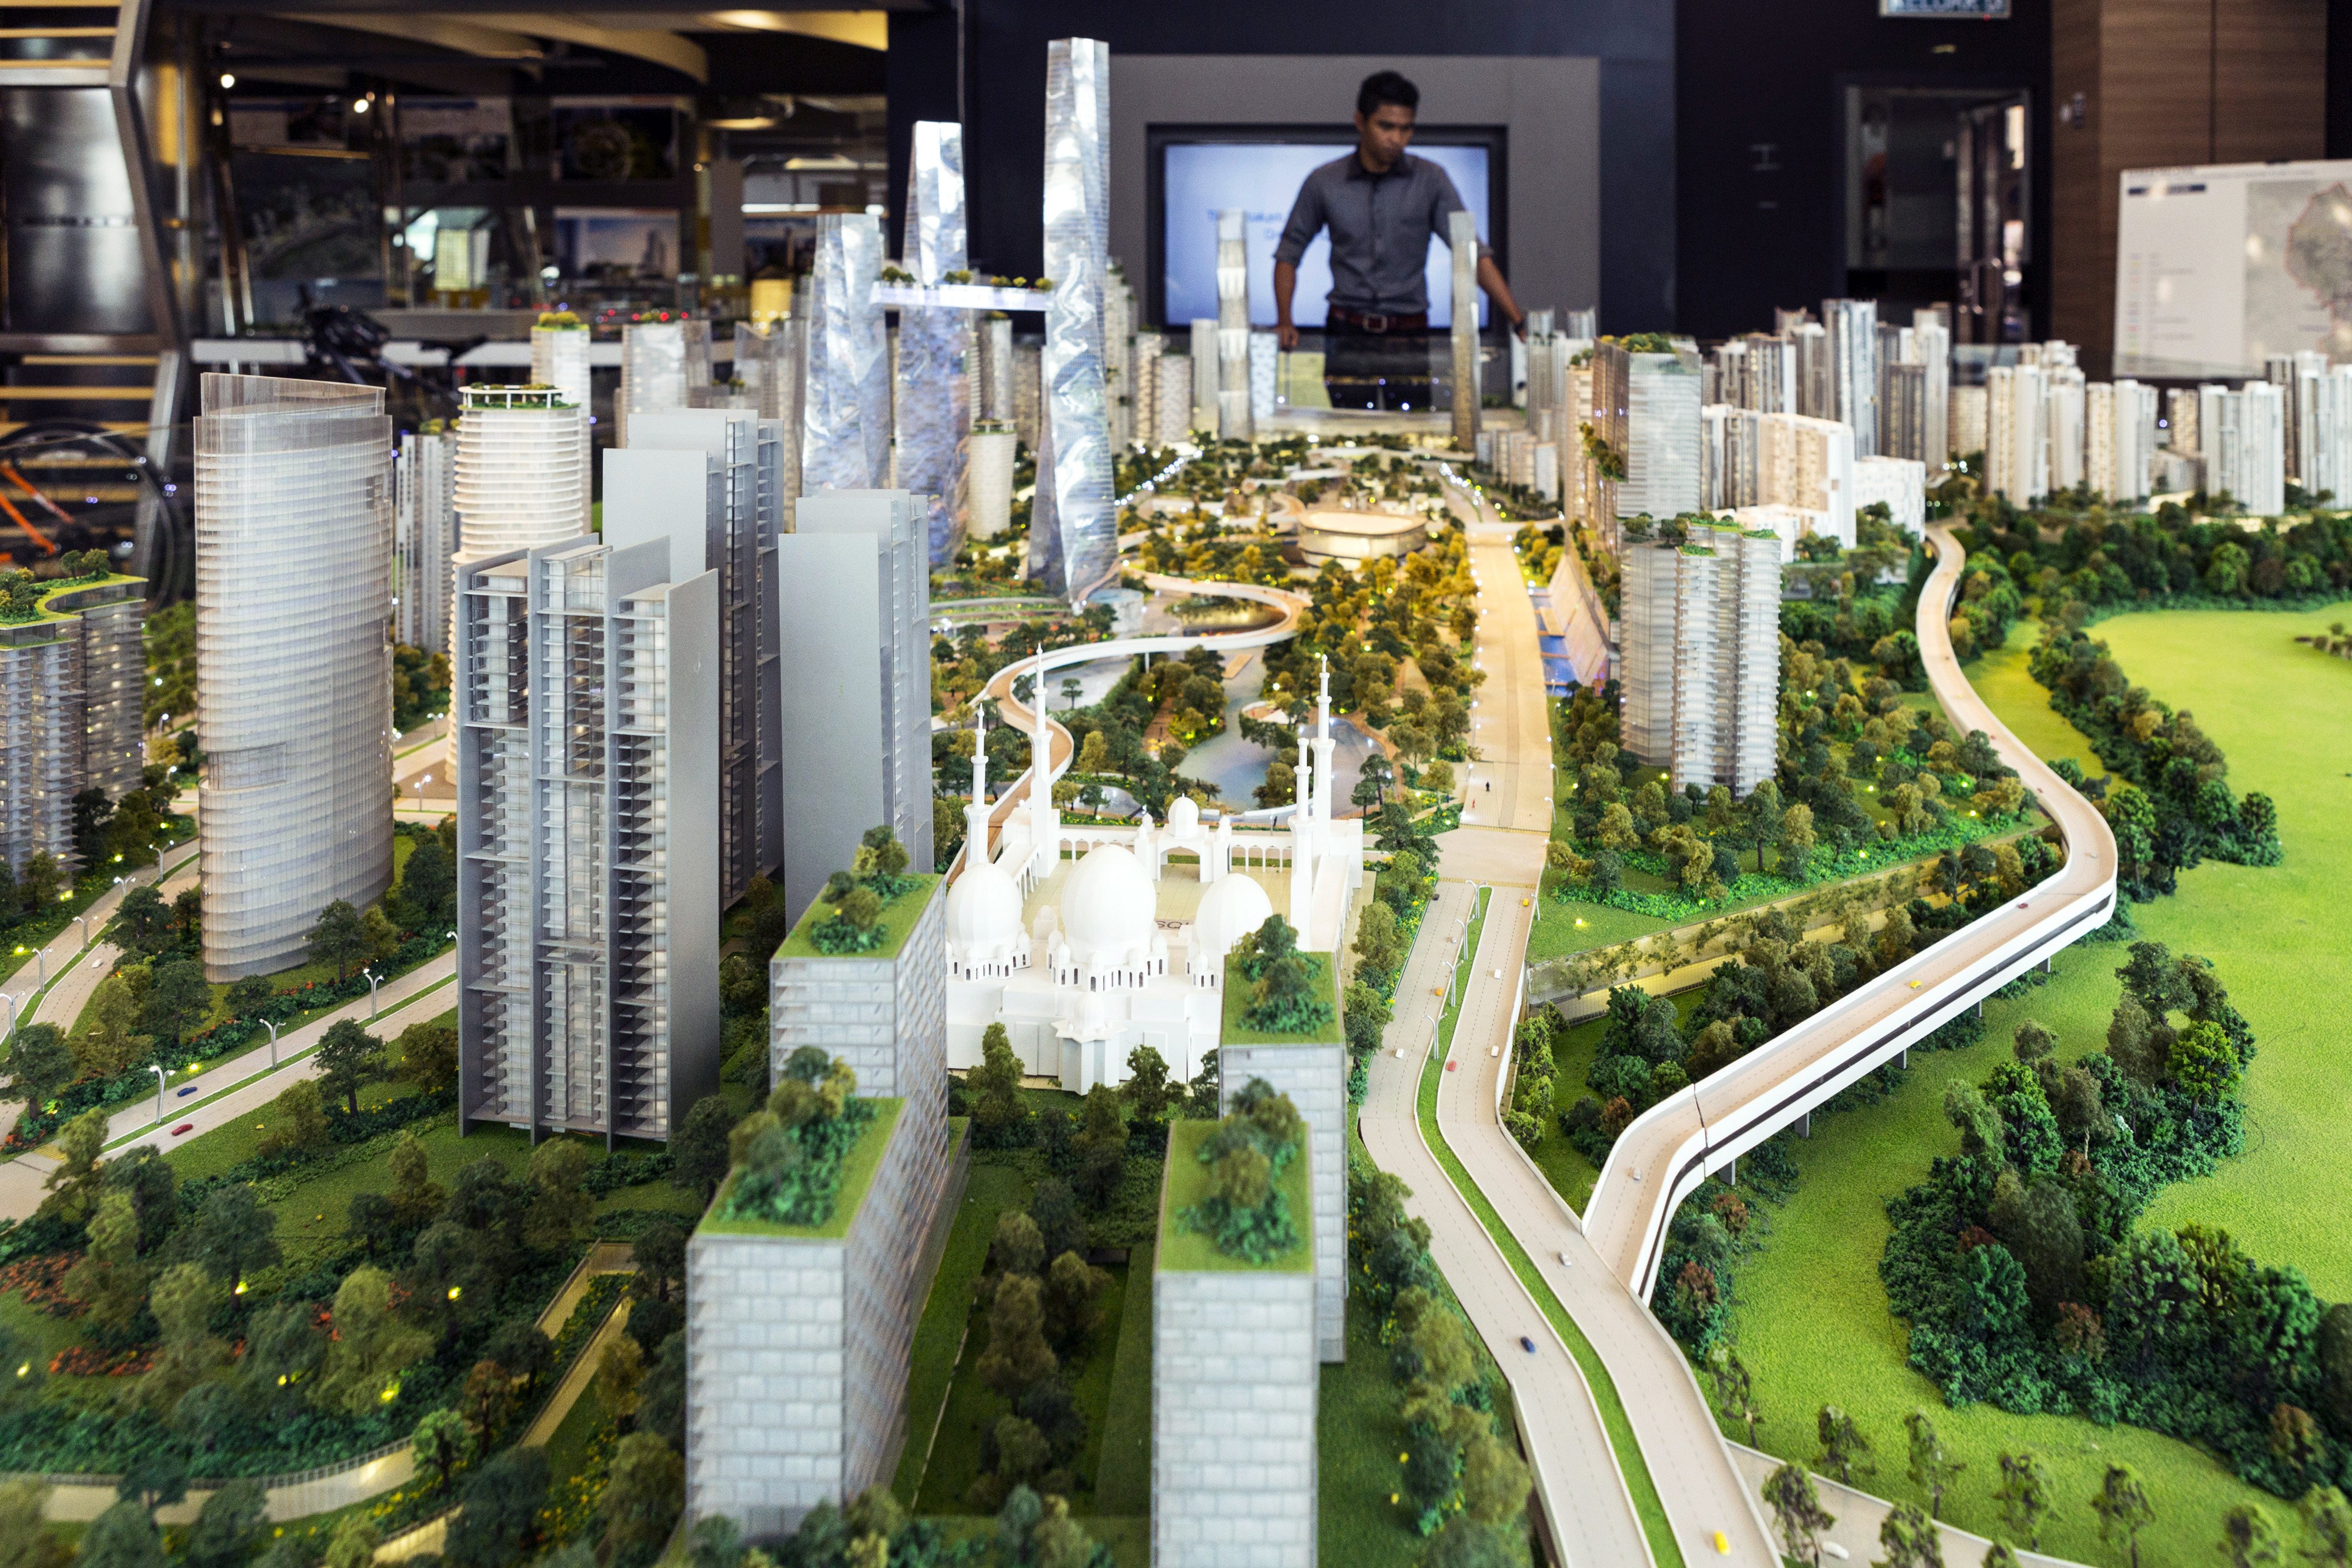 A visitor looks at a model of the proposed Bandar Malaysia development in 2016. PM Anwar Ibrahim’s government in October 2023 said it would take over the project, after a slew of aborted attempts by the previous developer. Photo: Bloomberg